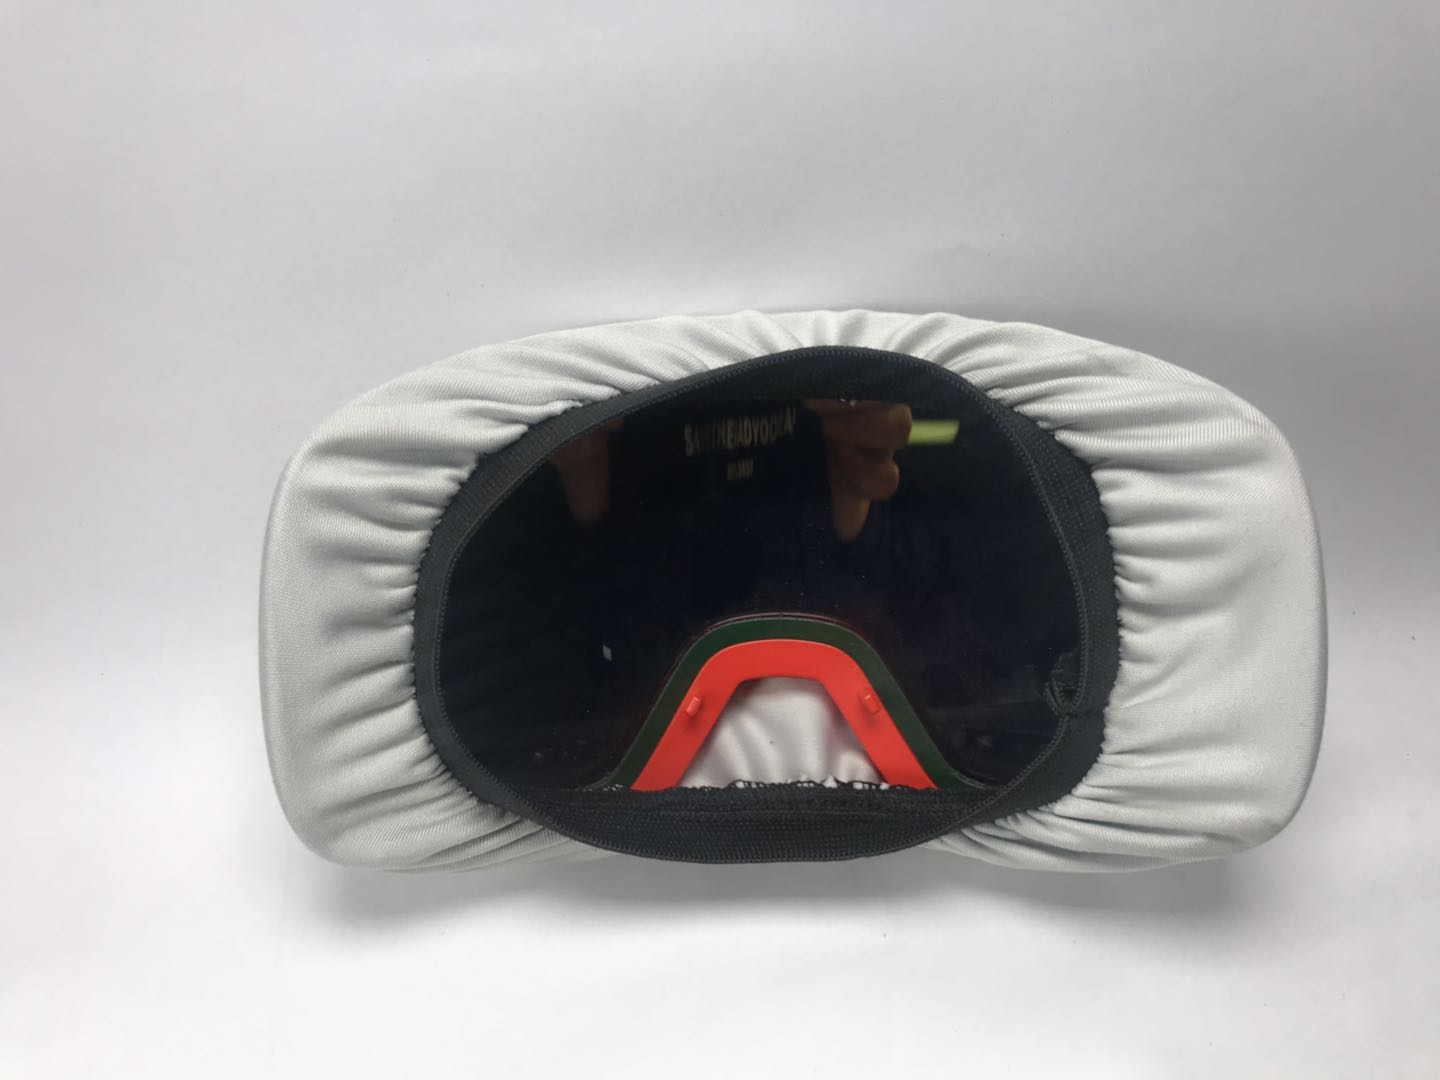 2021 Sunglasses, goggles, silver eye patch with LOGO printed on it